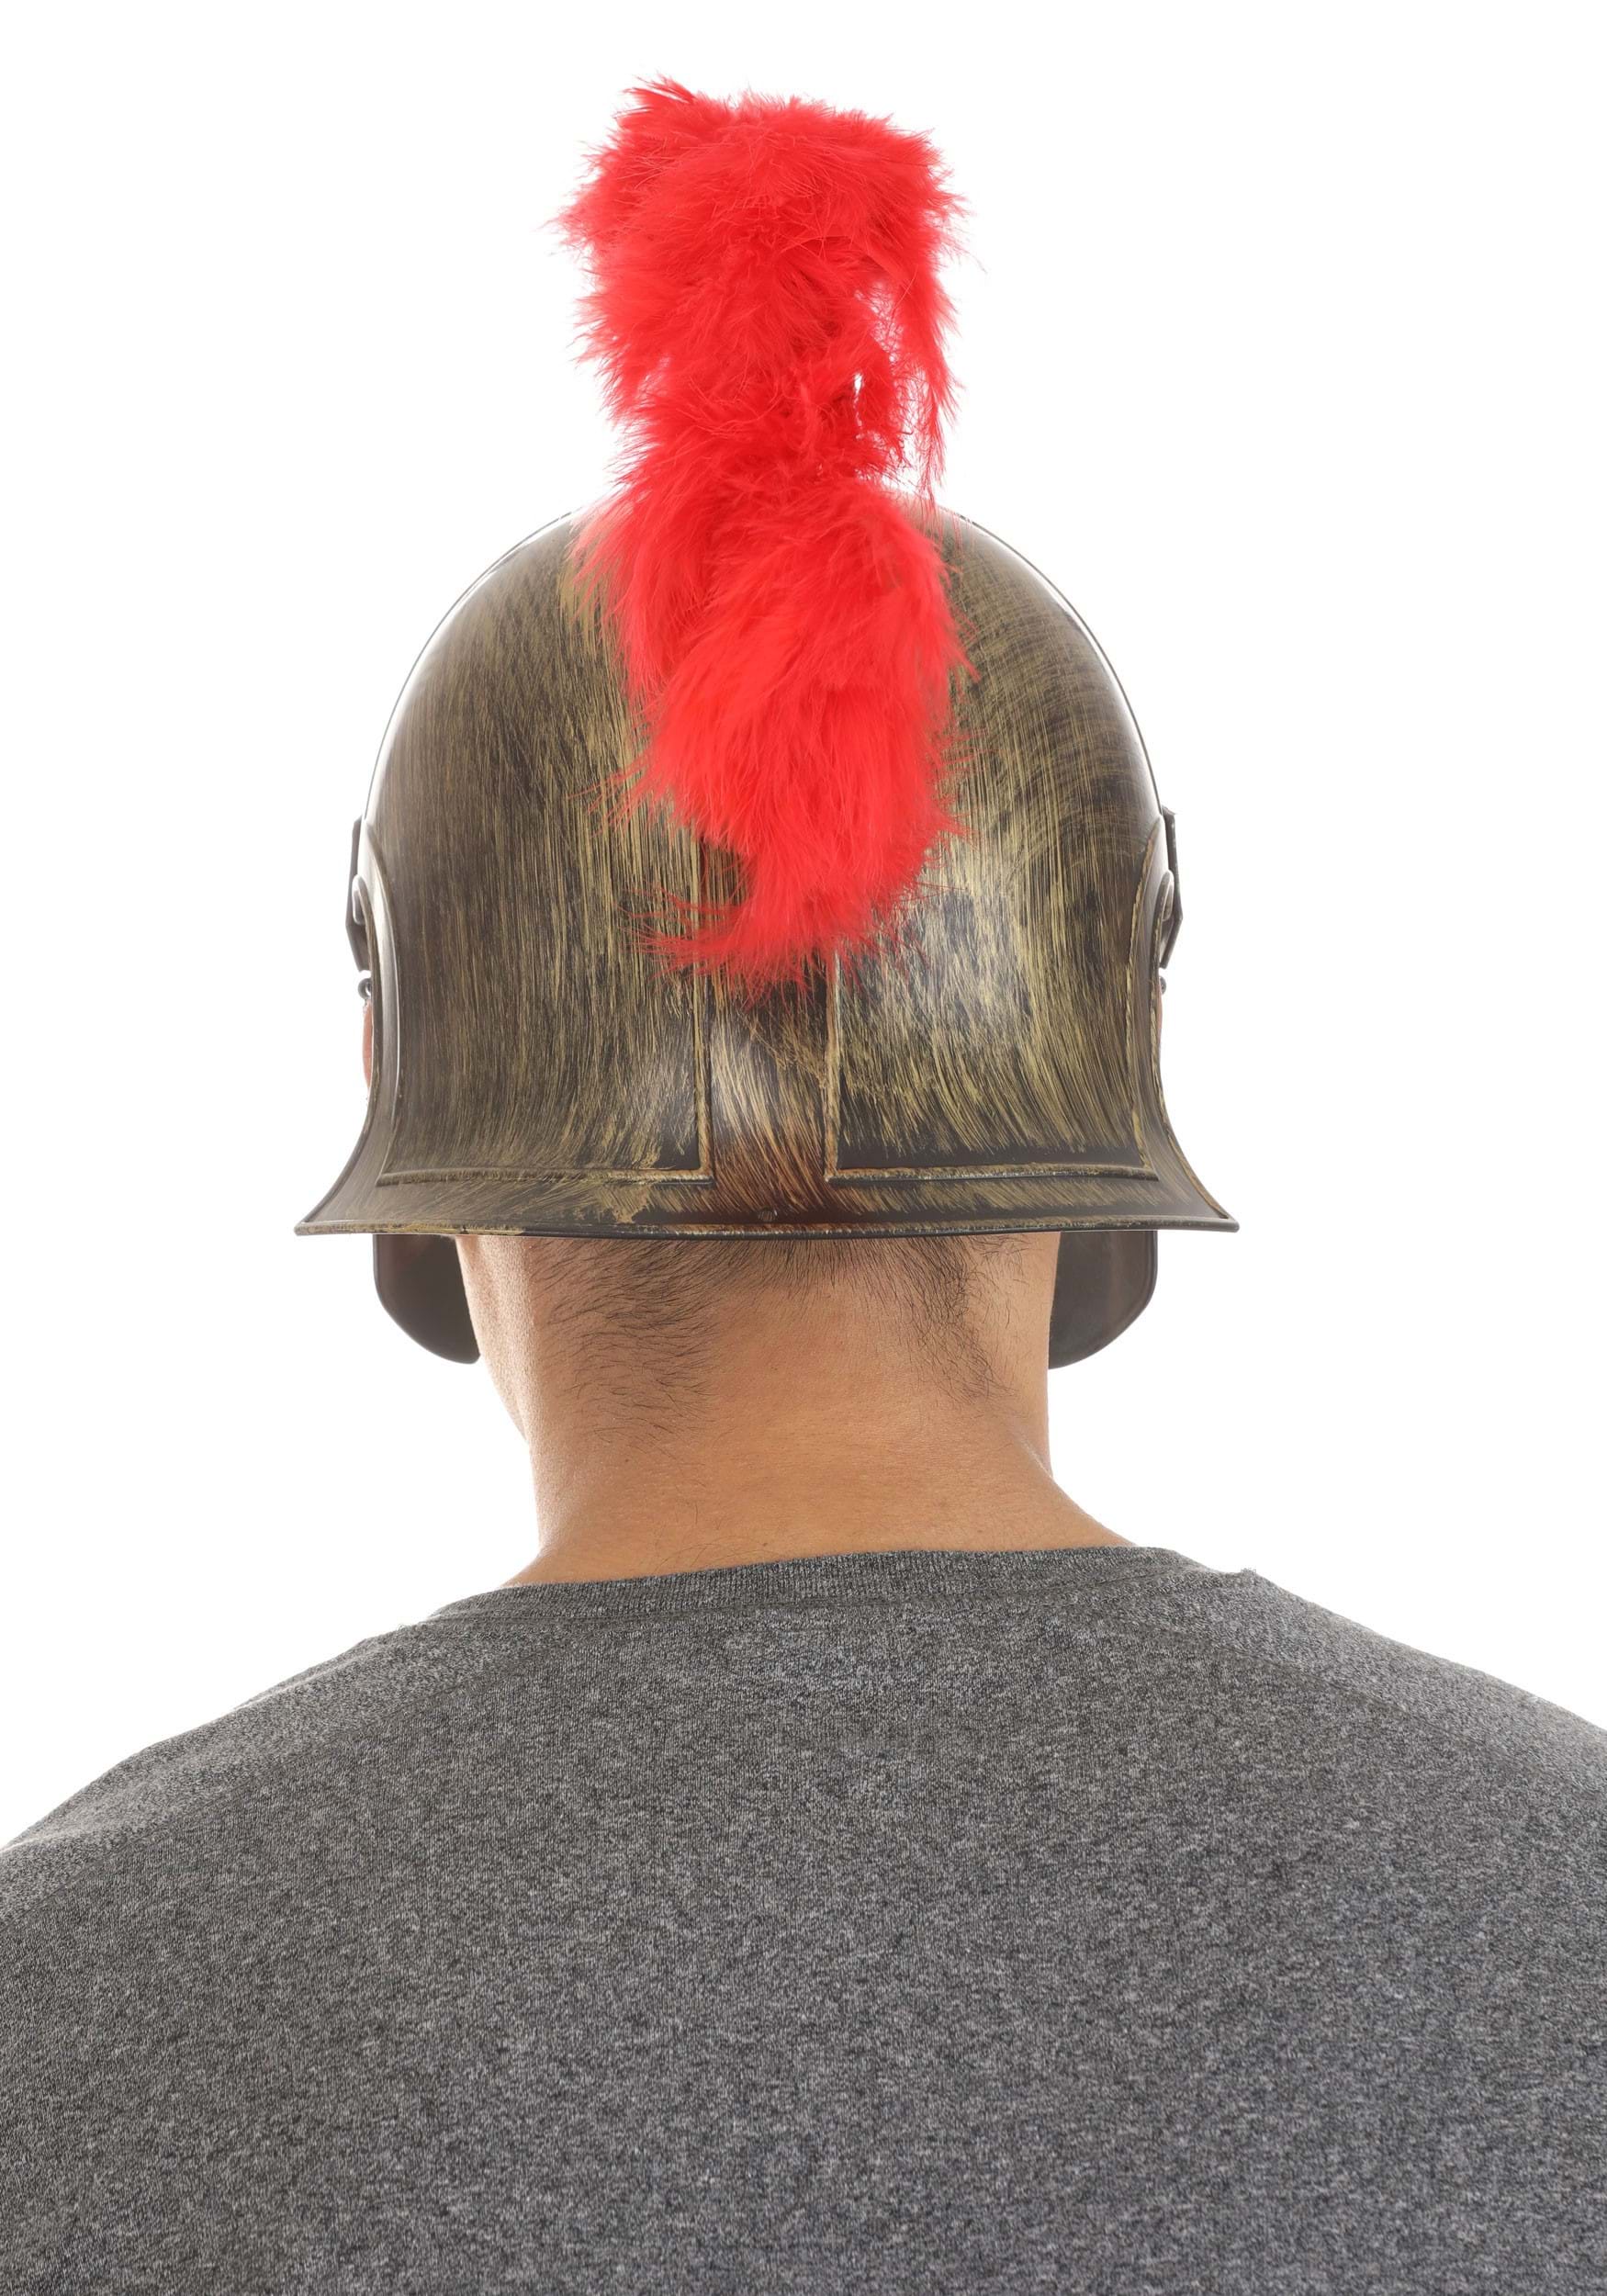 Gladiator Red Feather Costume Helmet For Adults